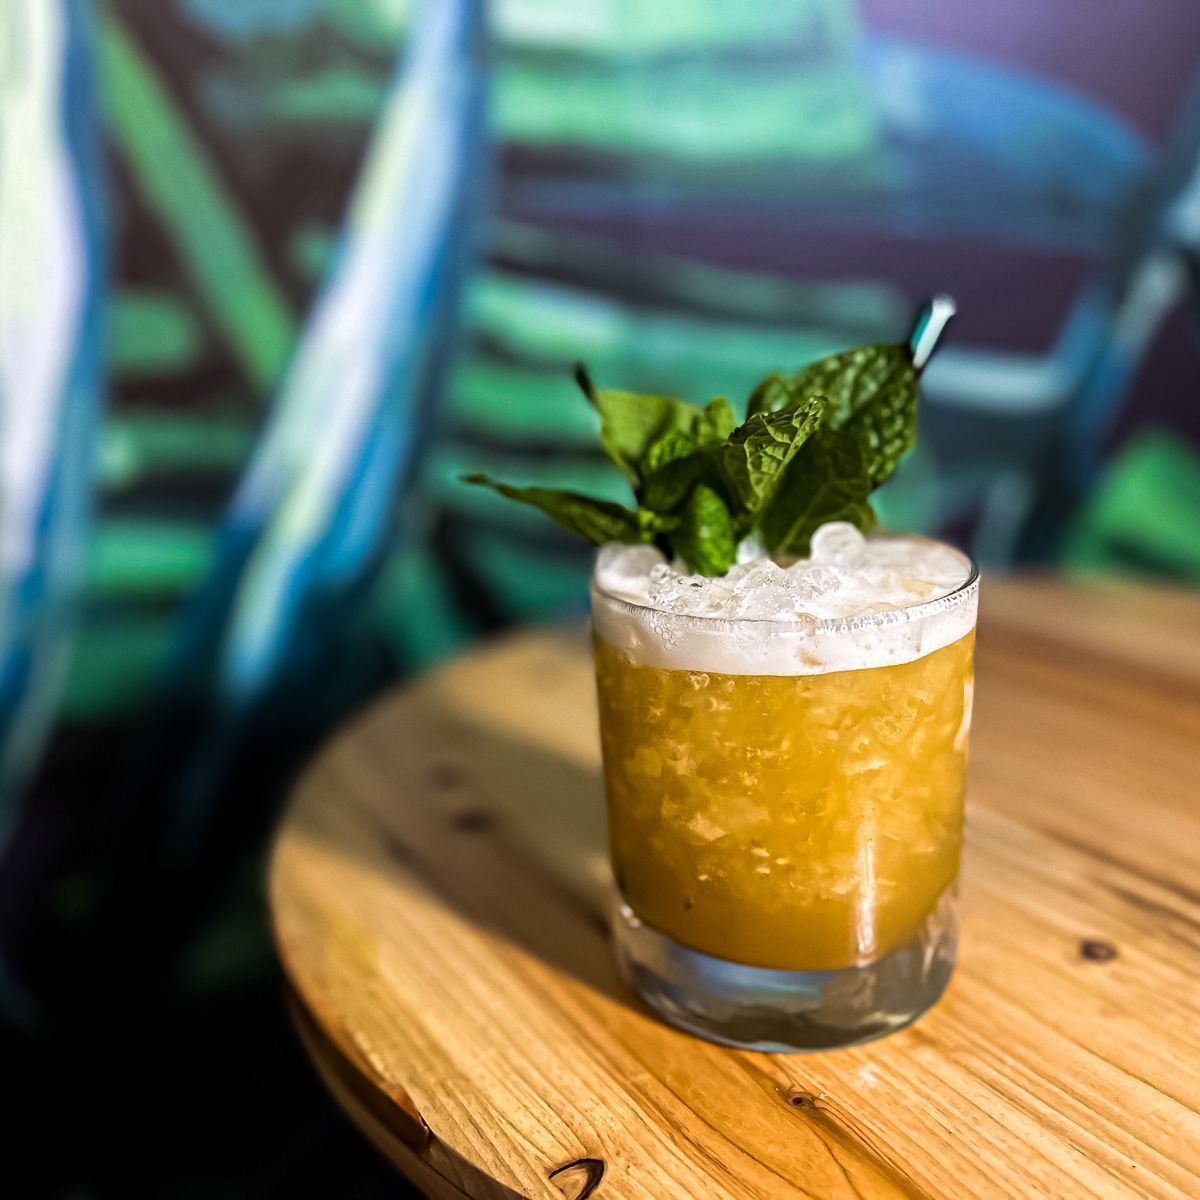 I came across this recipe on Modern Tiki, which doesn’t seem to be active anymore and that’s a shame. So I figured I would help promote as much of their blog as possible, and maybe they’ll pick it back up. Who knows? 